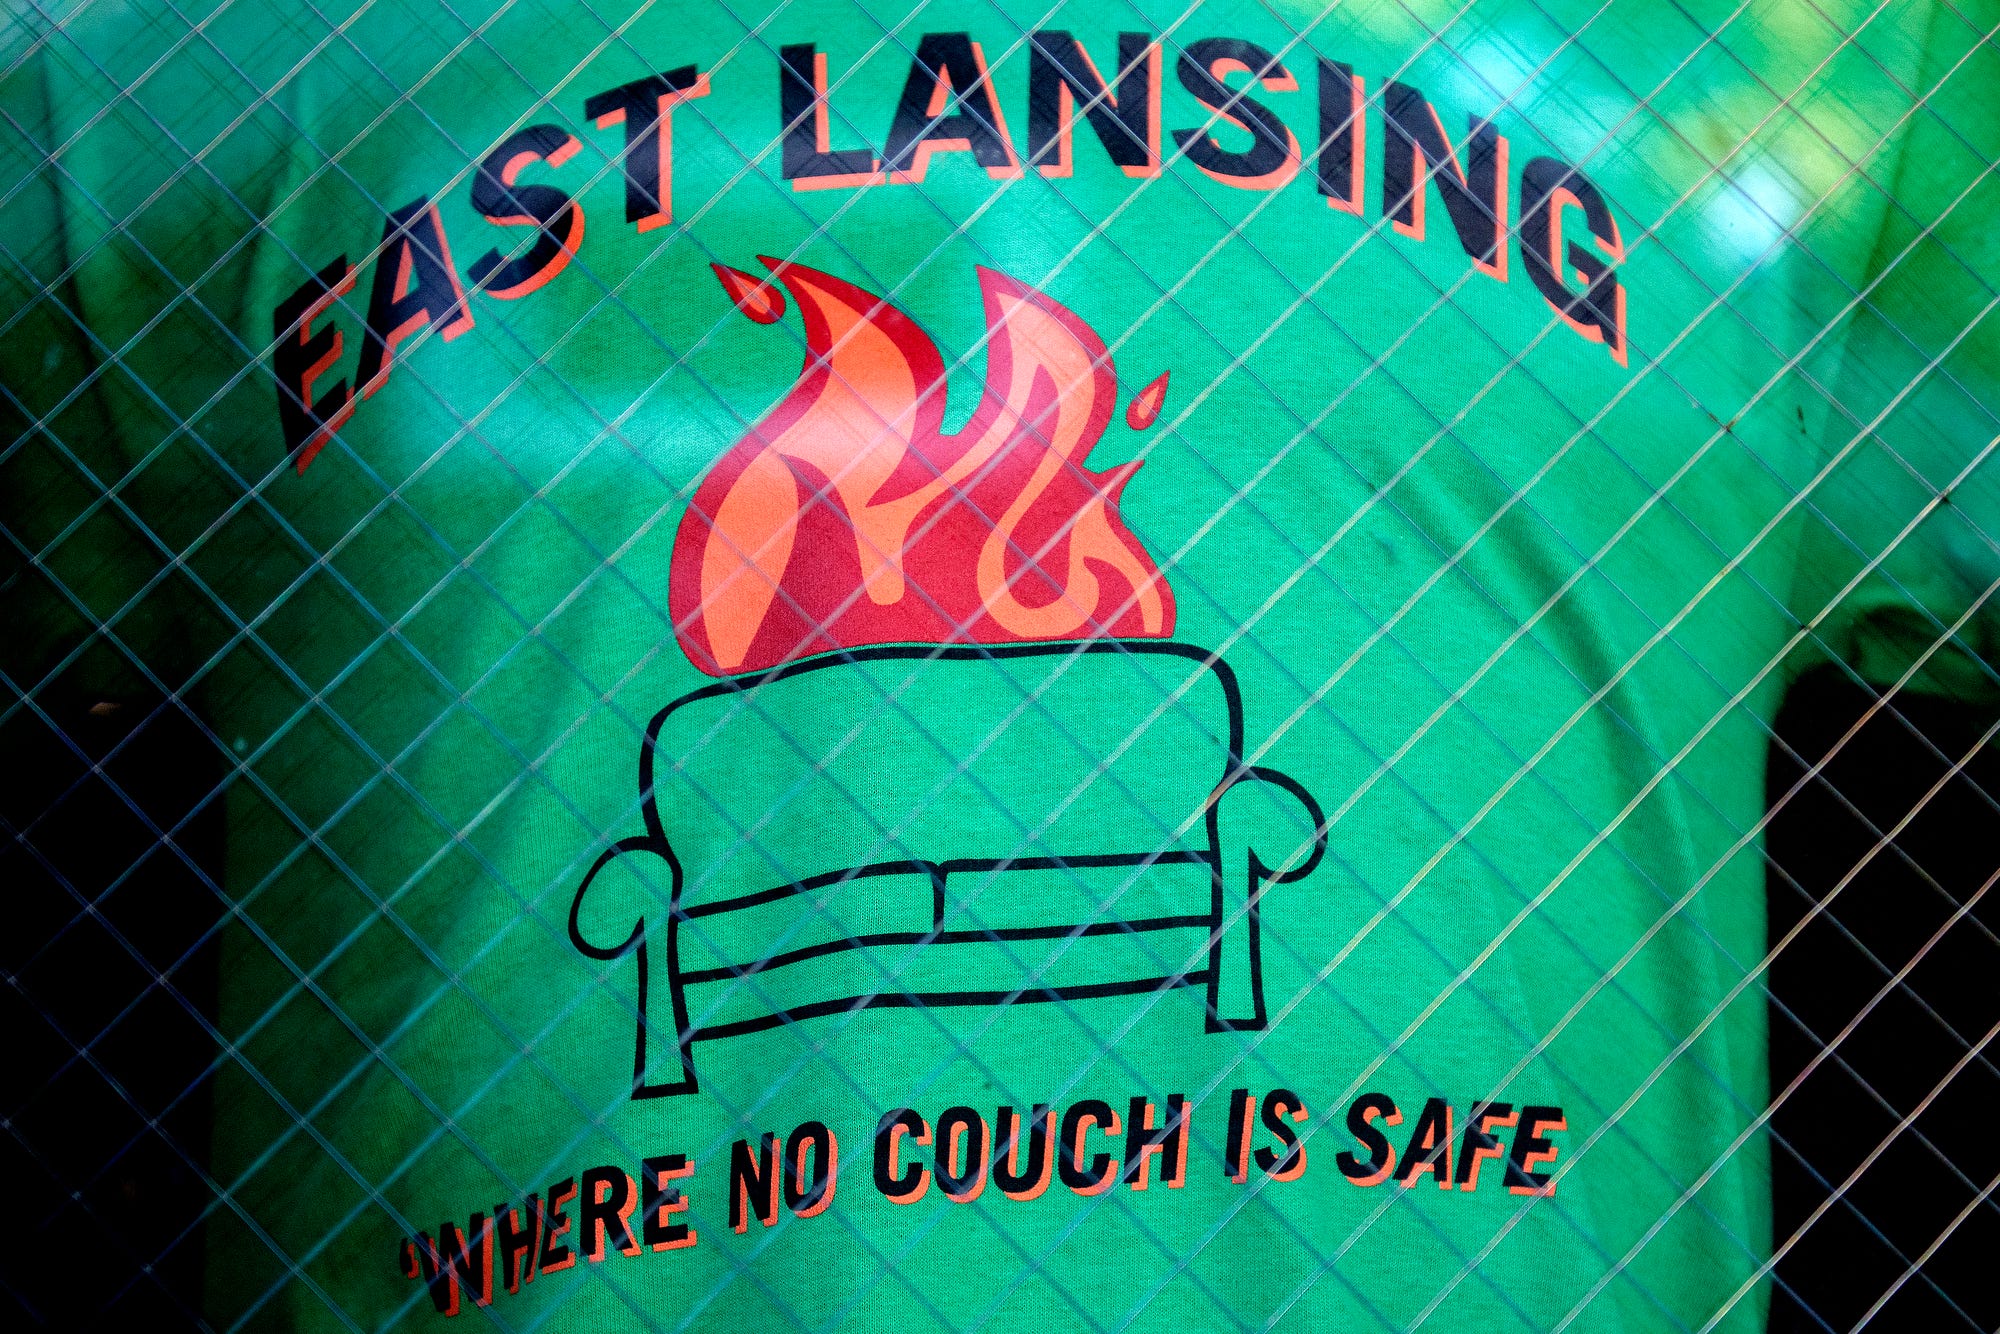 A shirt poking fun at East Lansing's history of couch burning is on display in the window at Campus Street Sportswear on Tuesday, Feb. 19, 2019, in downtown East Lansing.